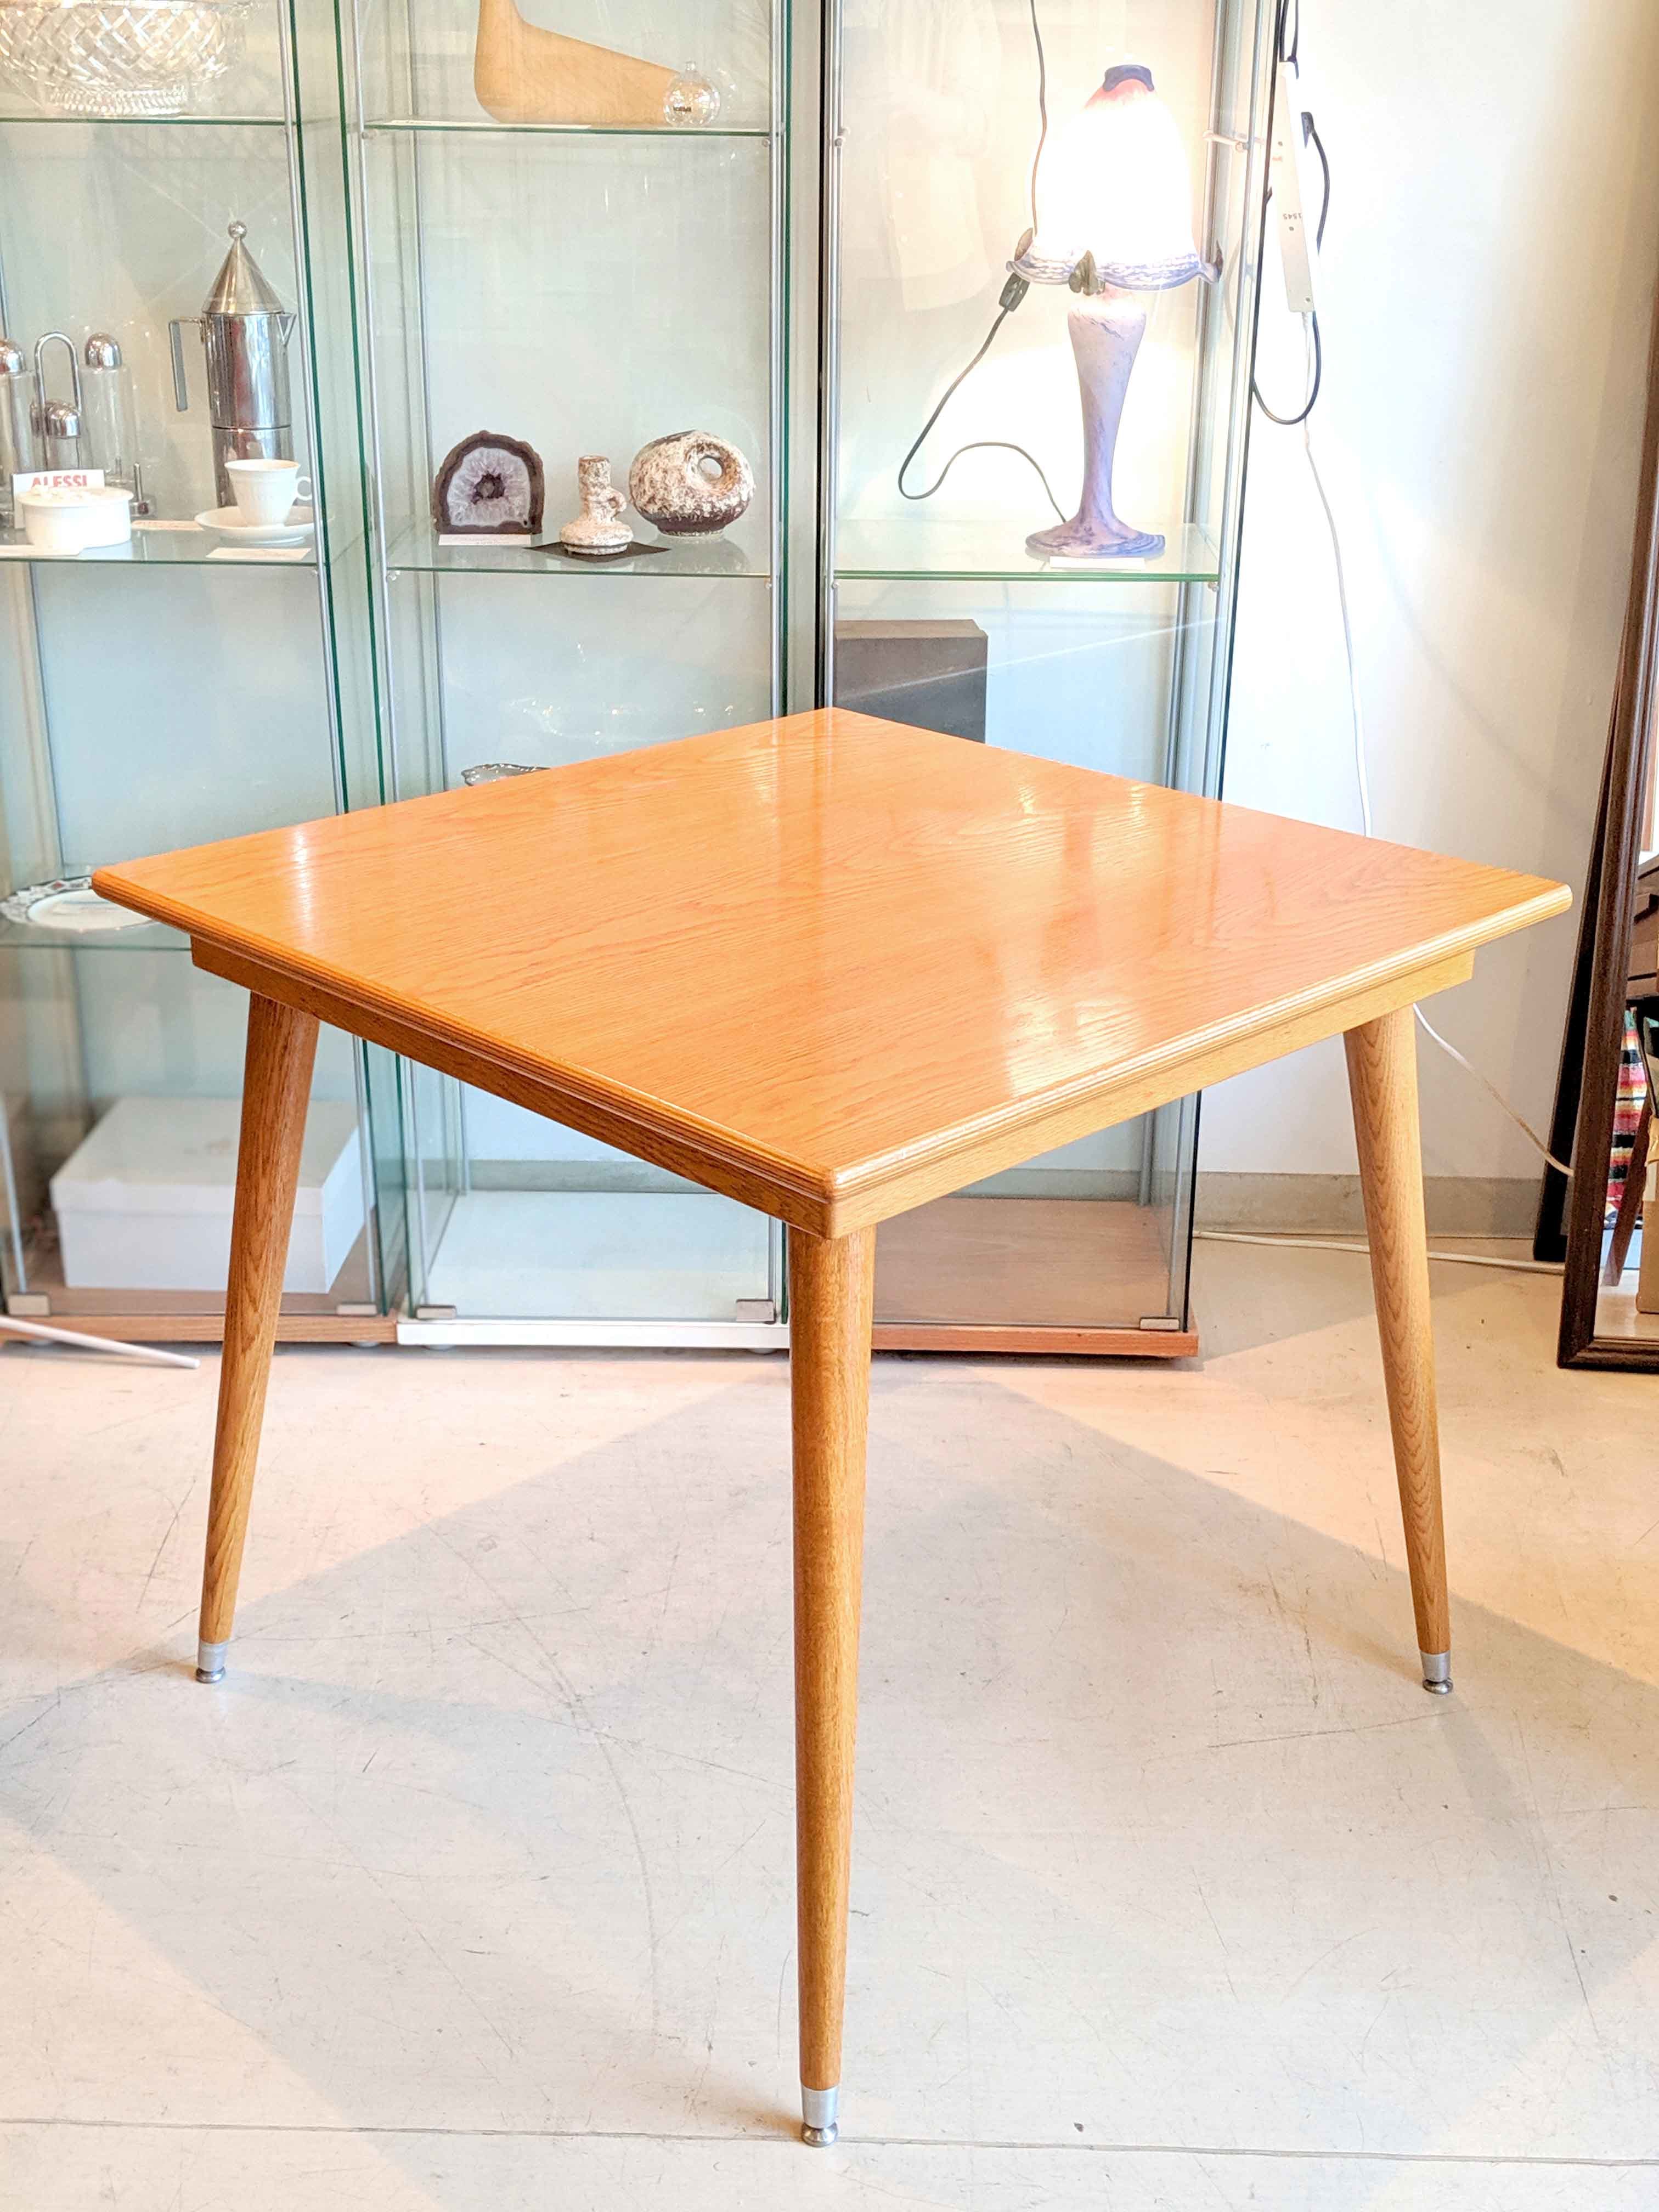 PACIFIC FURNITURE SERVICE】SQUARE TABLE - L 入荷 | ReSale LOOPのブログ